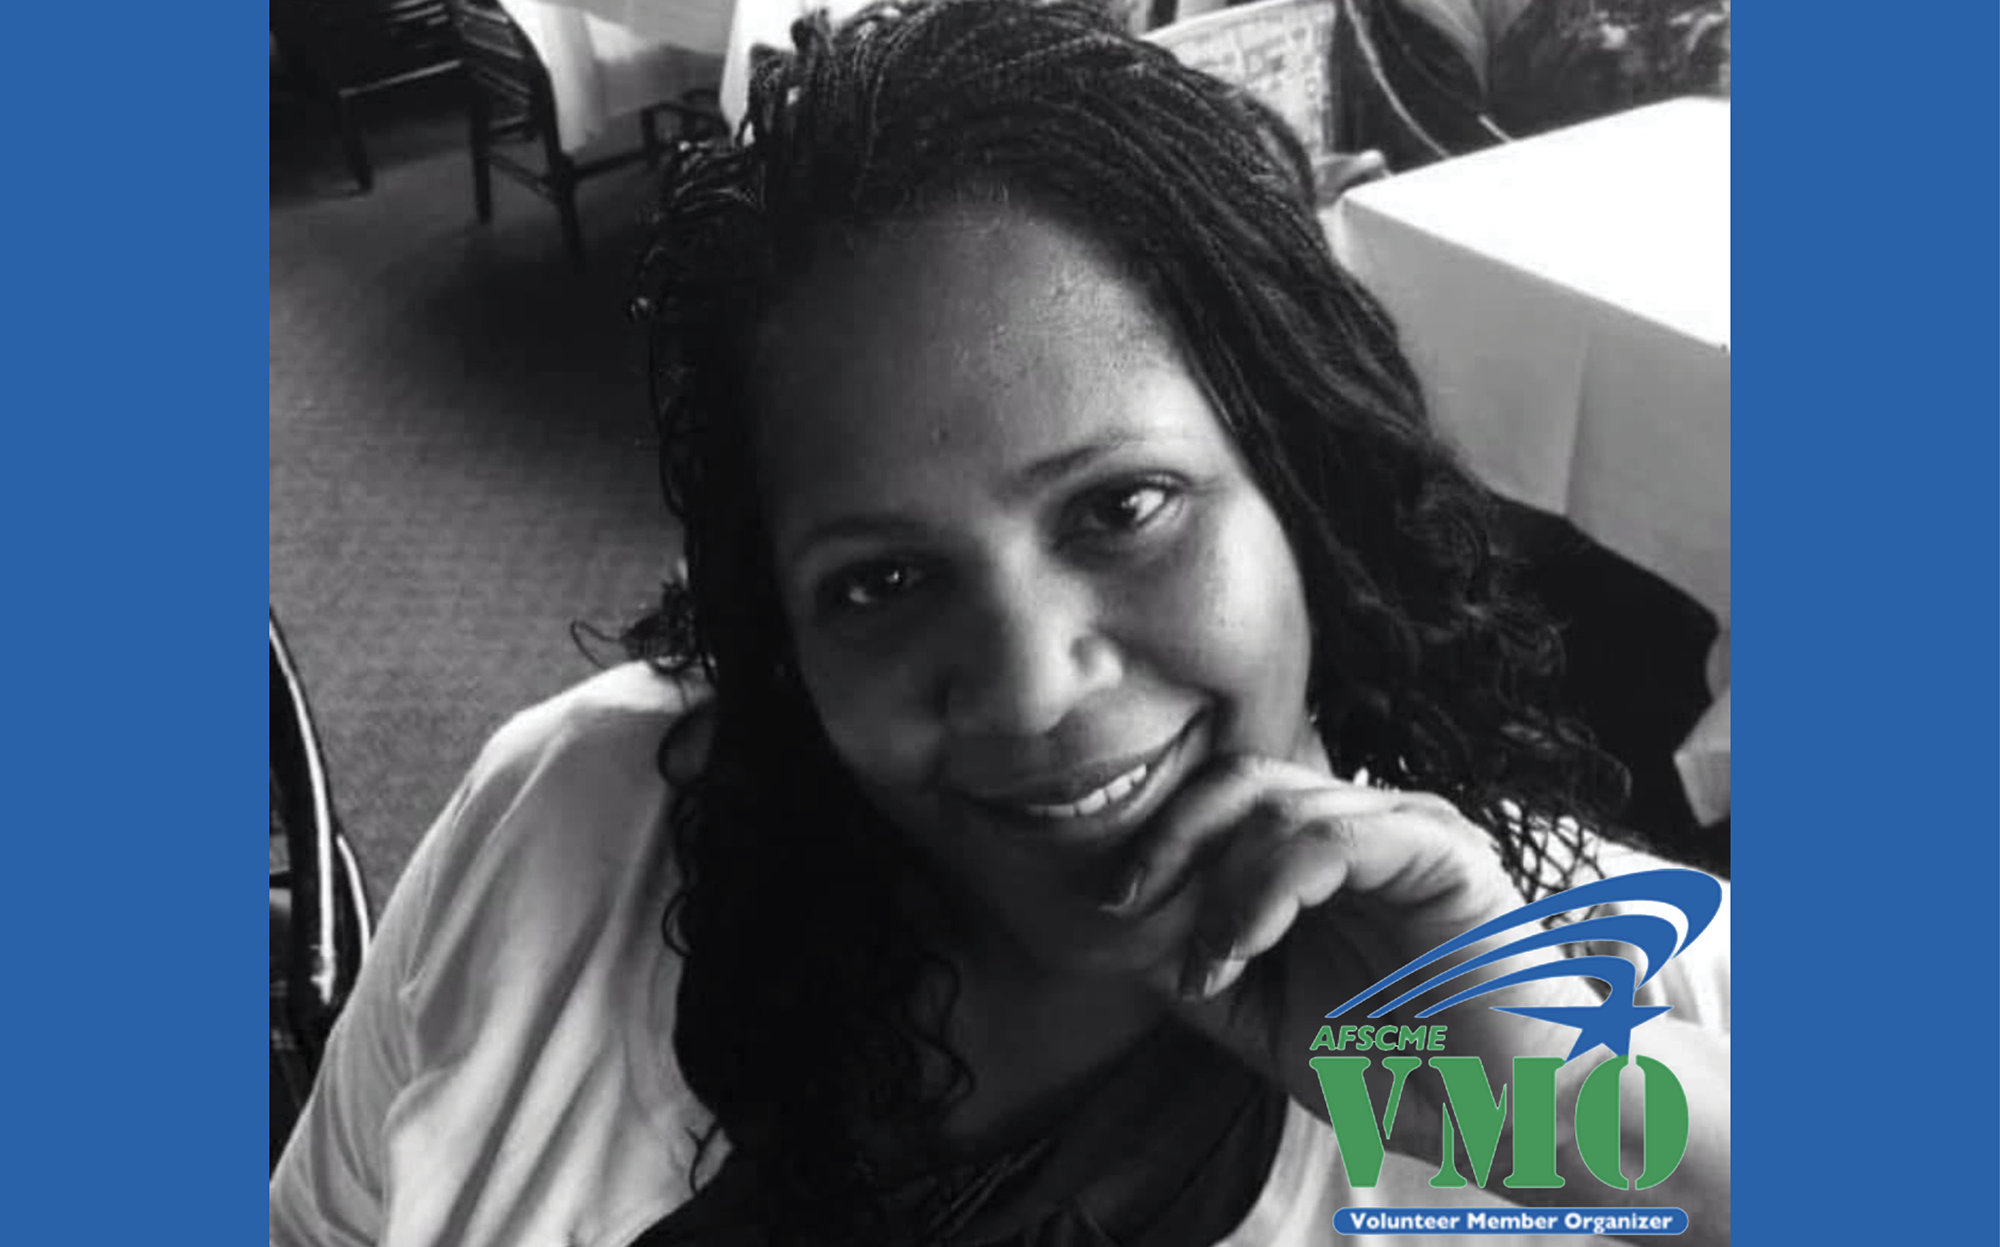 A black and white photo of WFSE member Karen E Johnson, bordered by blue bars to the left and right with an overlay that reads "ASFCME VMO Volunteer Member Organizer"